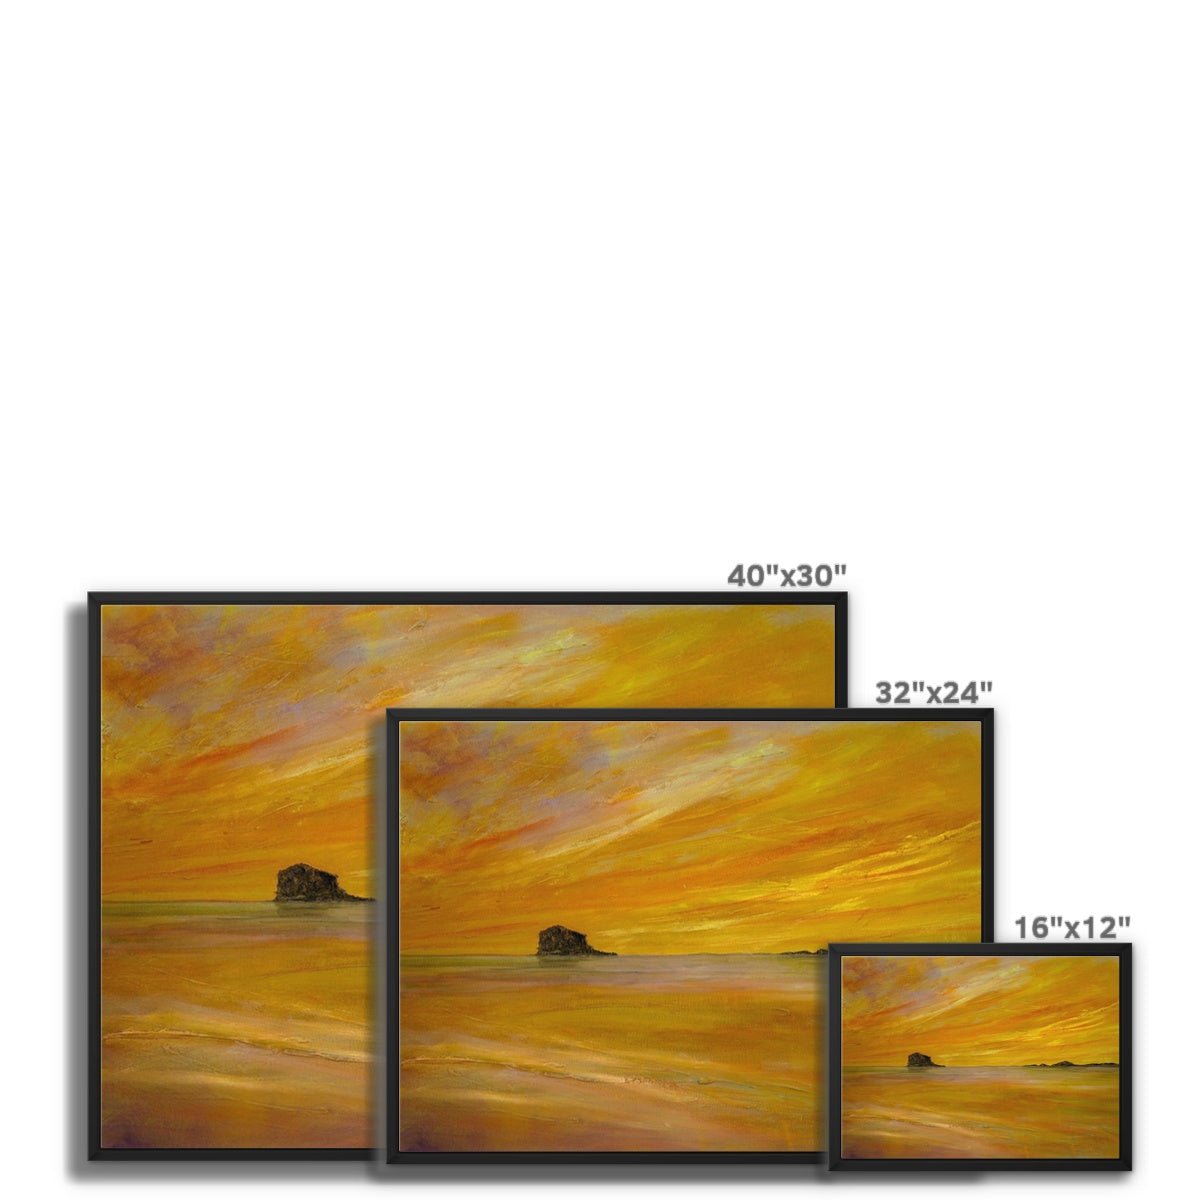 Bass Rock Dusk Painting | Framed Canvas From Scotland-Floating Framed Canvas Prints-Edinburgh & Glasgow Art Gallery-Paintings, Prints, Homeware, Art Gifts From Scotland By Scottish Artist Kevin Hunter